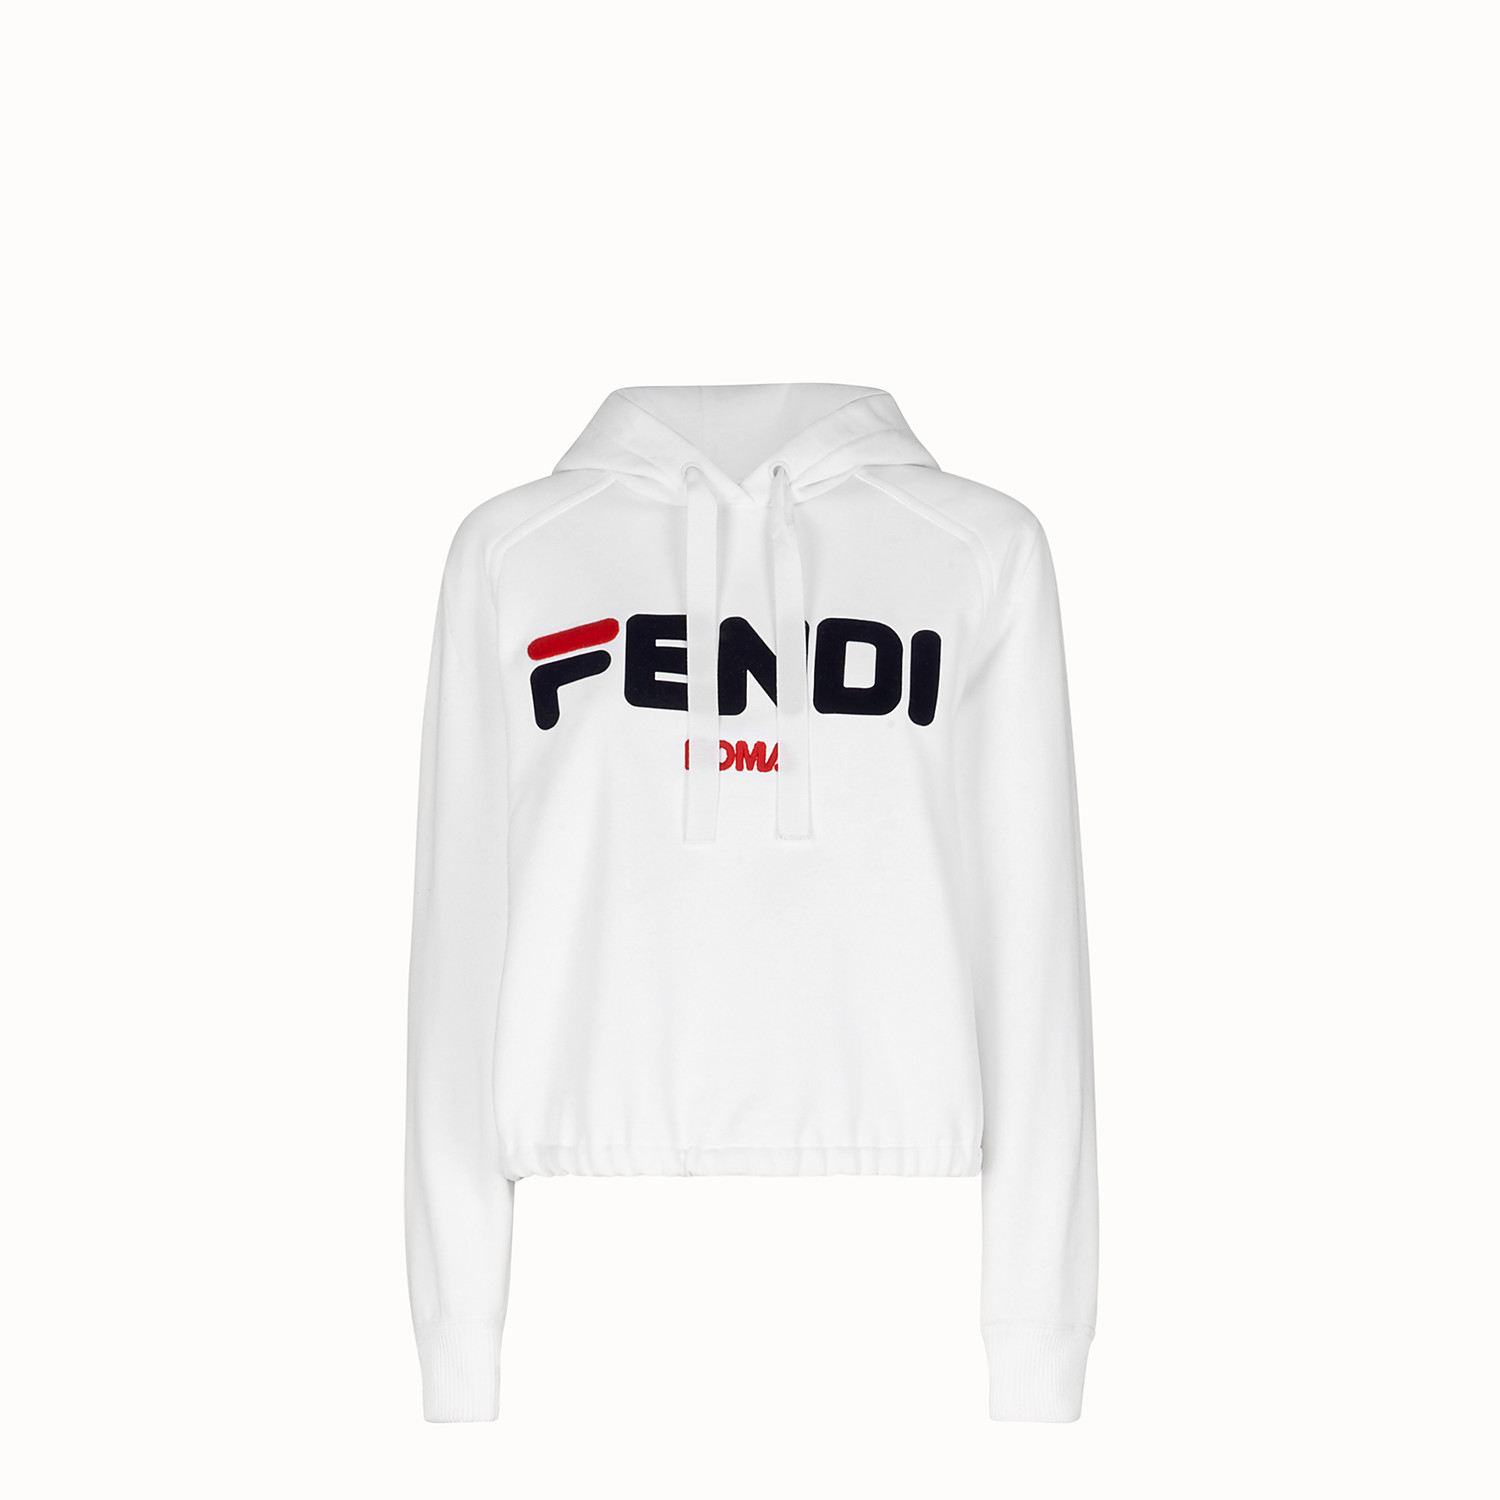 Fendi And Fila's Hey Reilly Logo Capsule Now Available For Pre-Order1500 x 1500